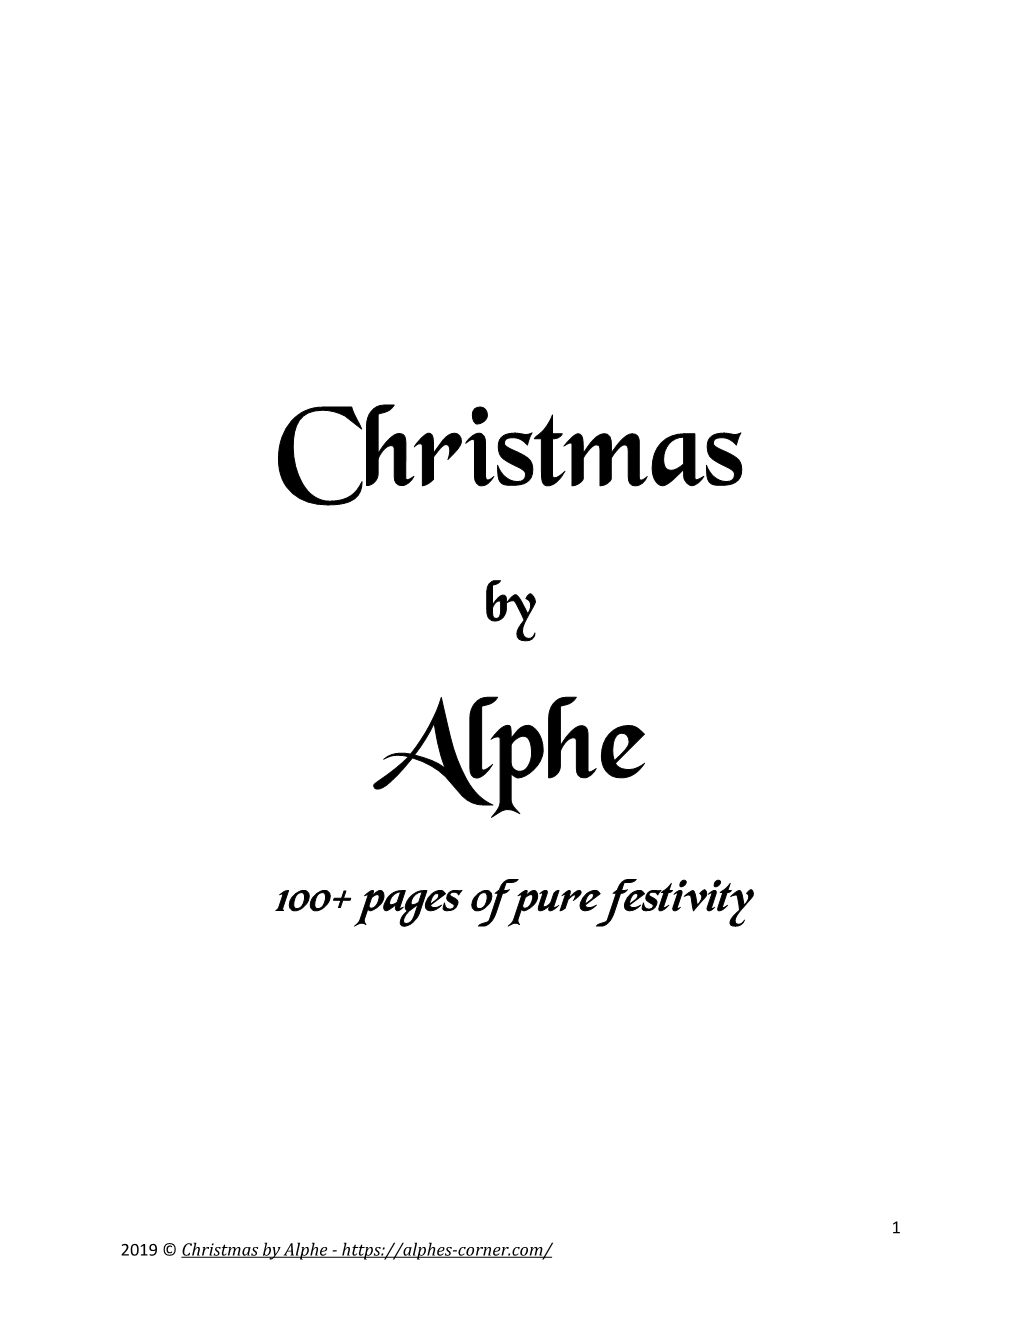 Christmas by Alphe